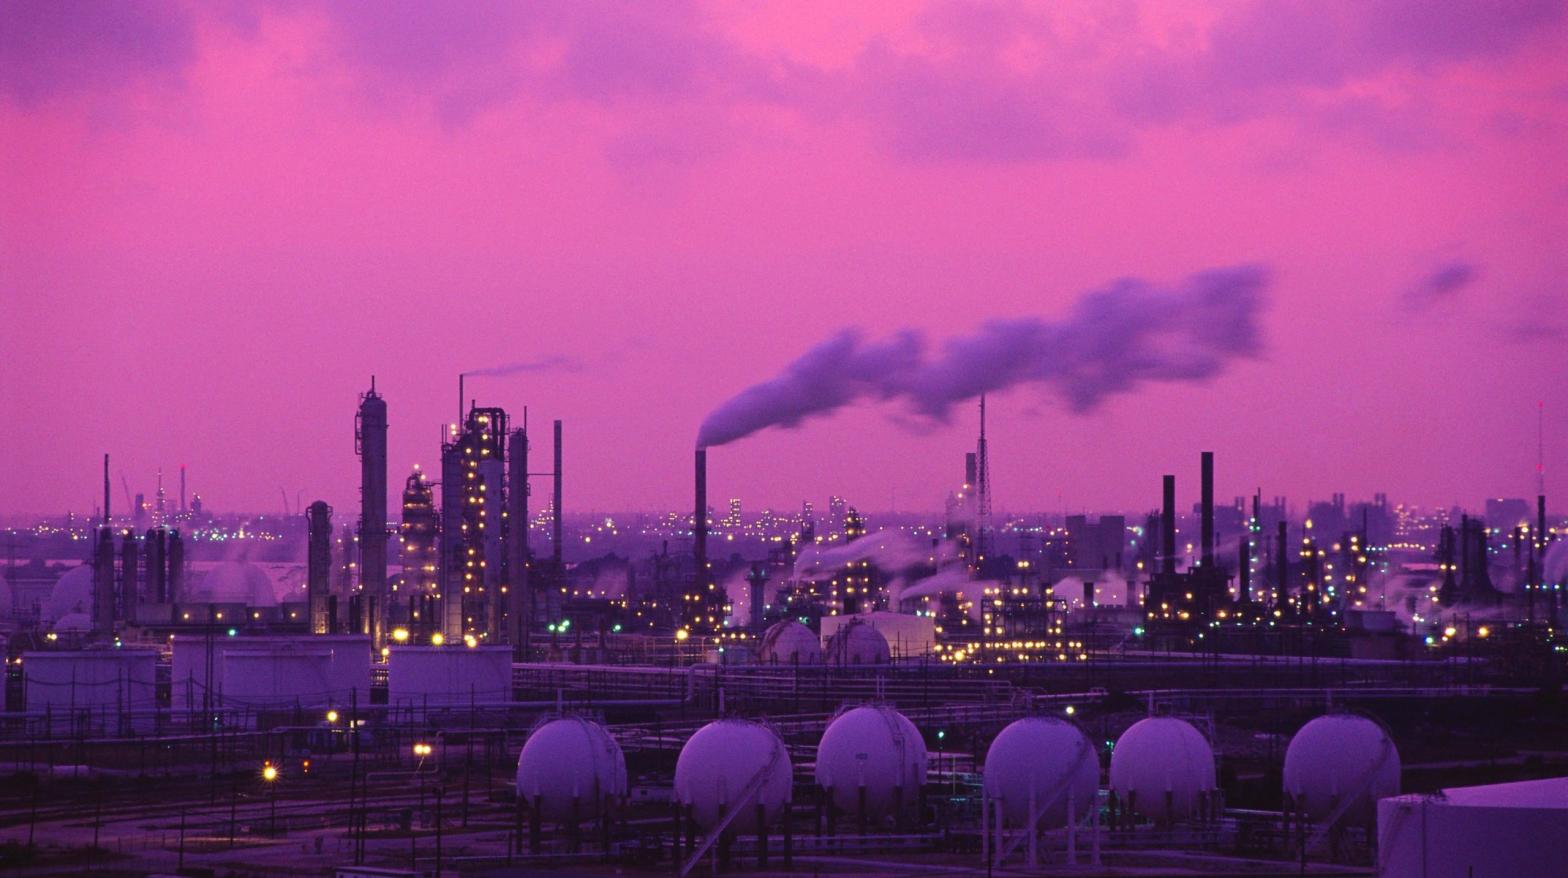 The sun sets over an Exxon oil refinery. (Photo: Greg Smith/Corbis, Getty Images)